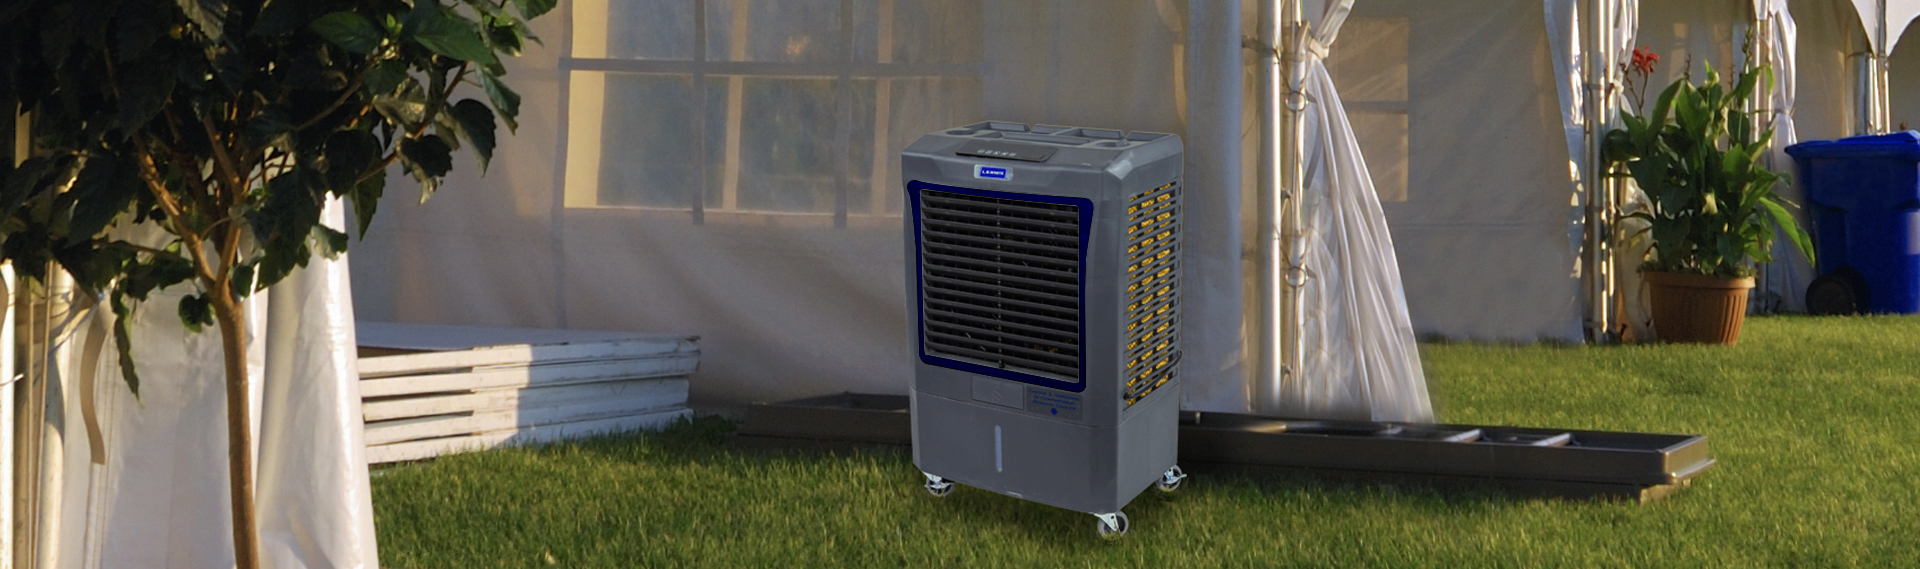 Our PC-31 Portable Evaporative Cooler keeps event guests cool and comfy.